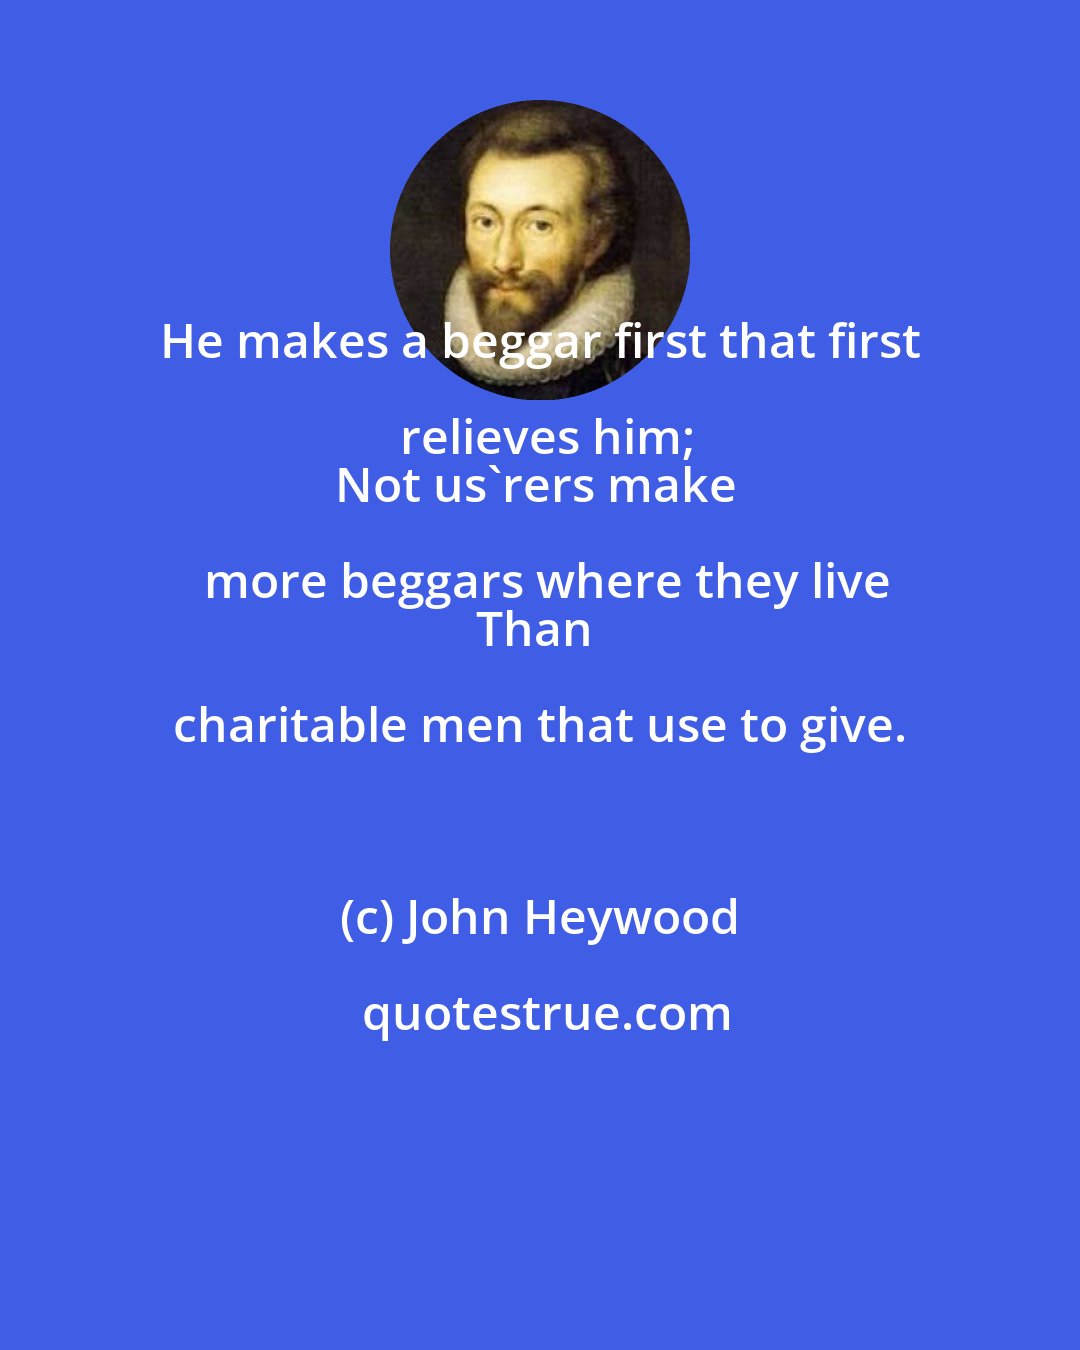 John Heywood: He makes a beggar first that first relieves him;
Not us'rers make more beggars where they live
Than charitable men that use to give.